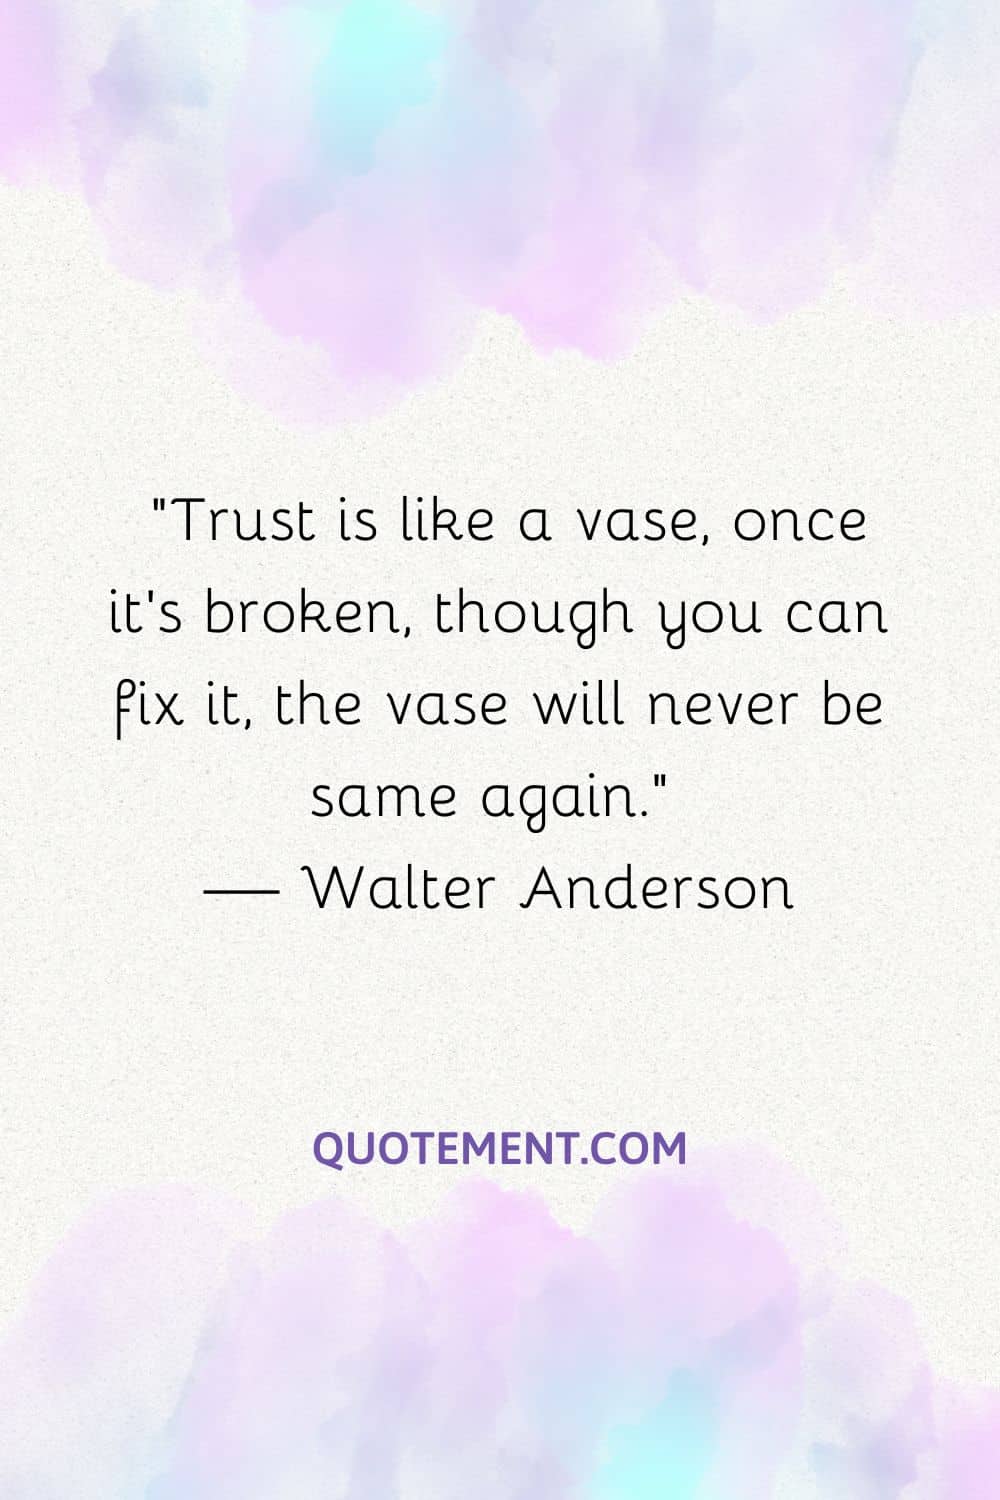 Trust is like a vase, once it’s broken, though you can fix it, the vase will never be same again